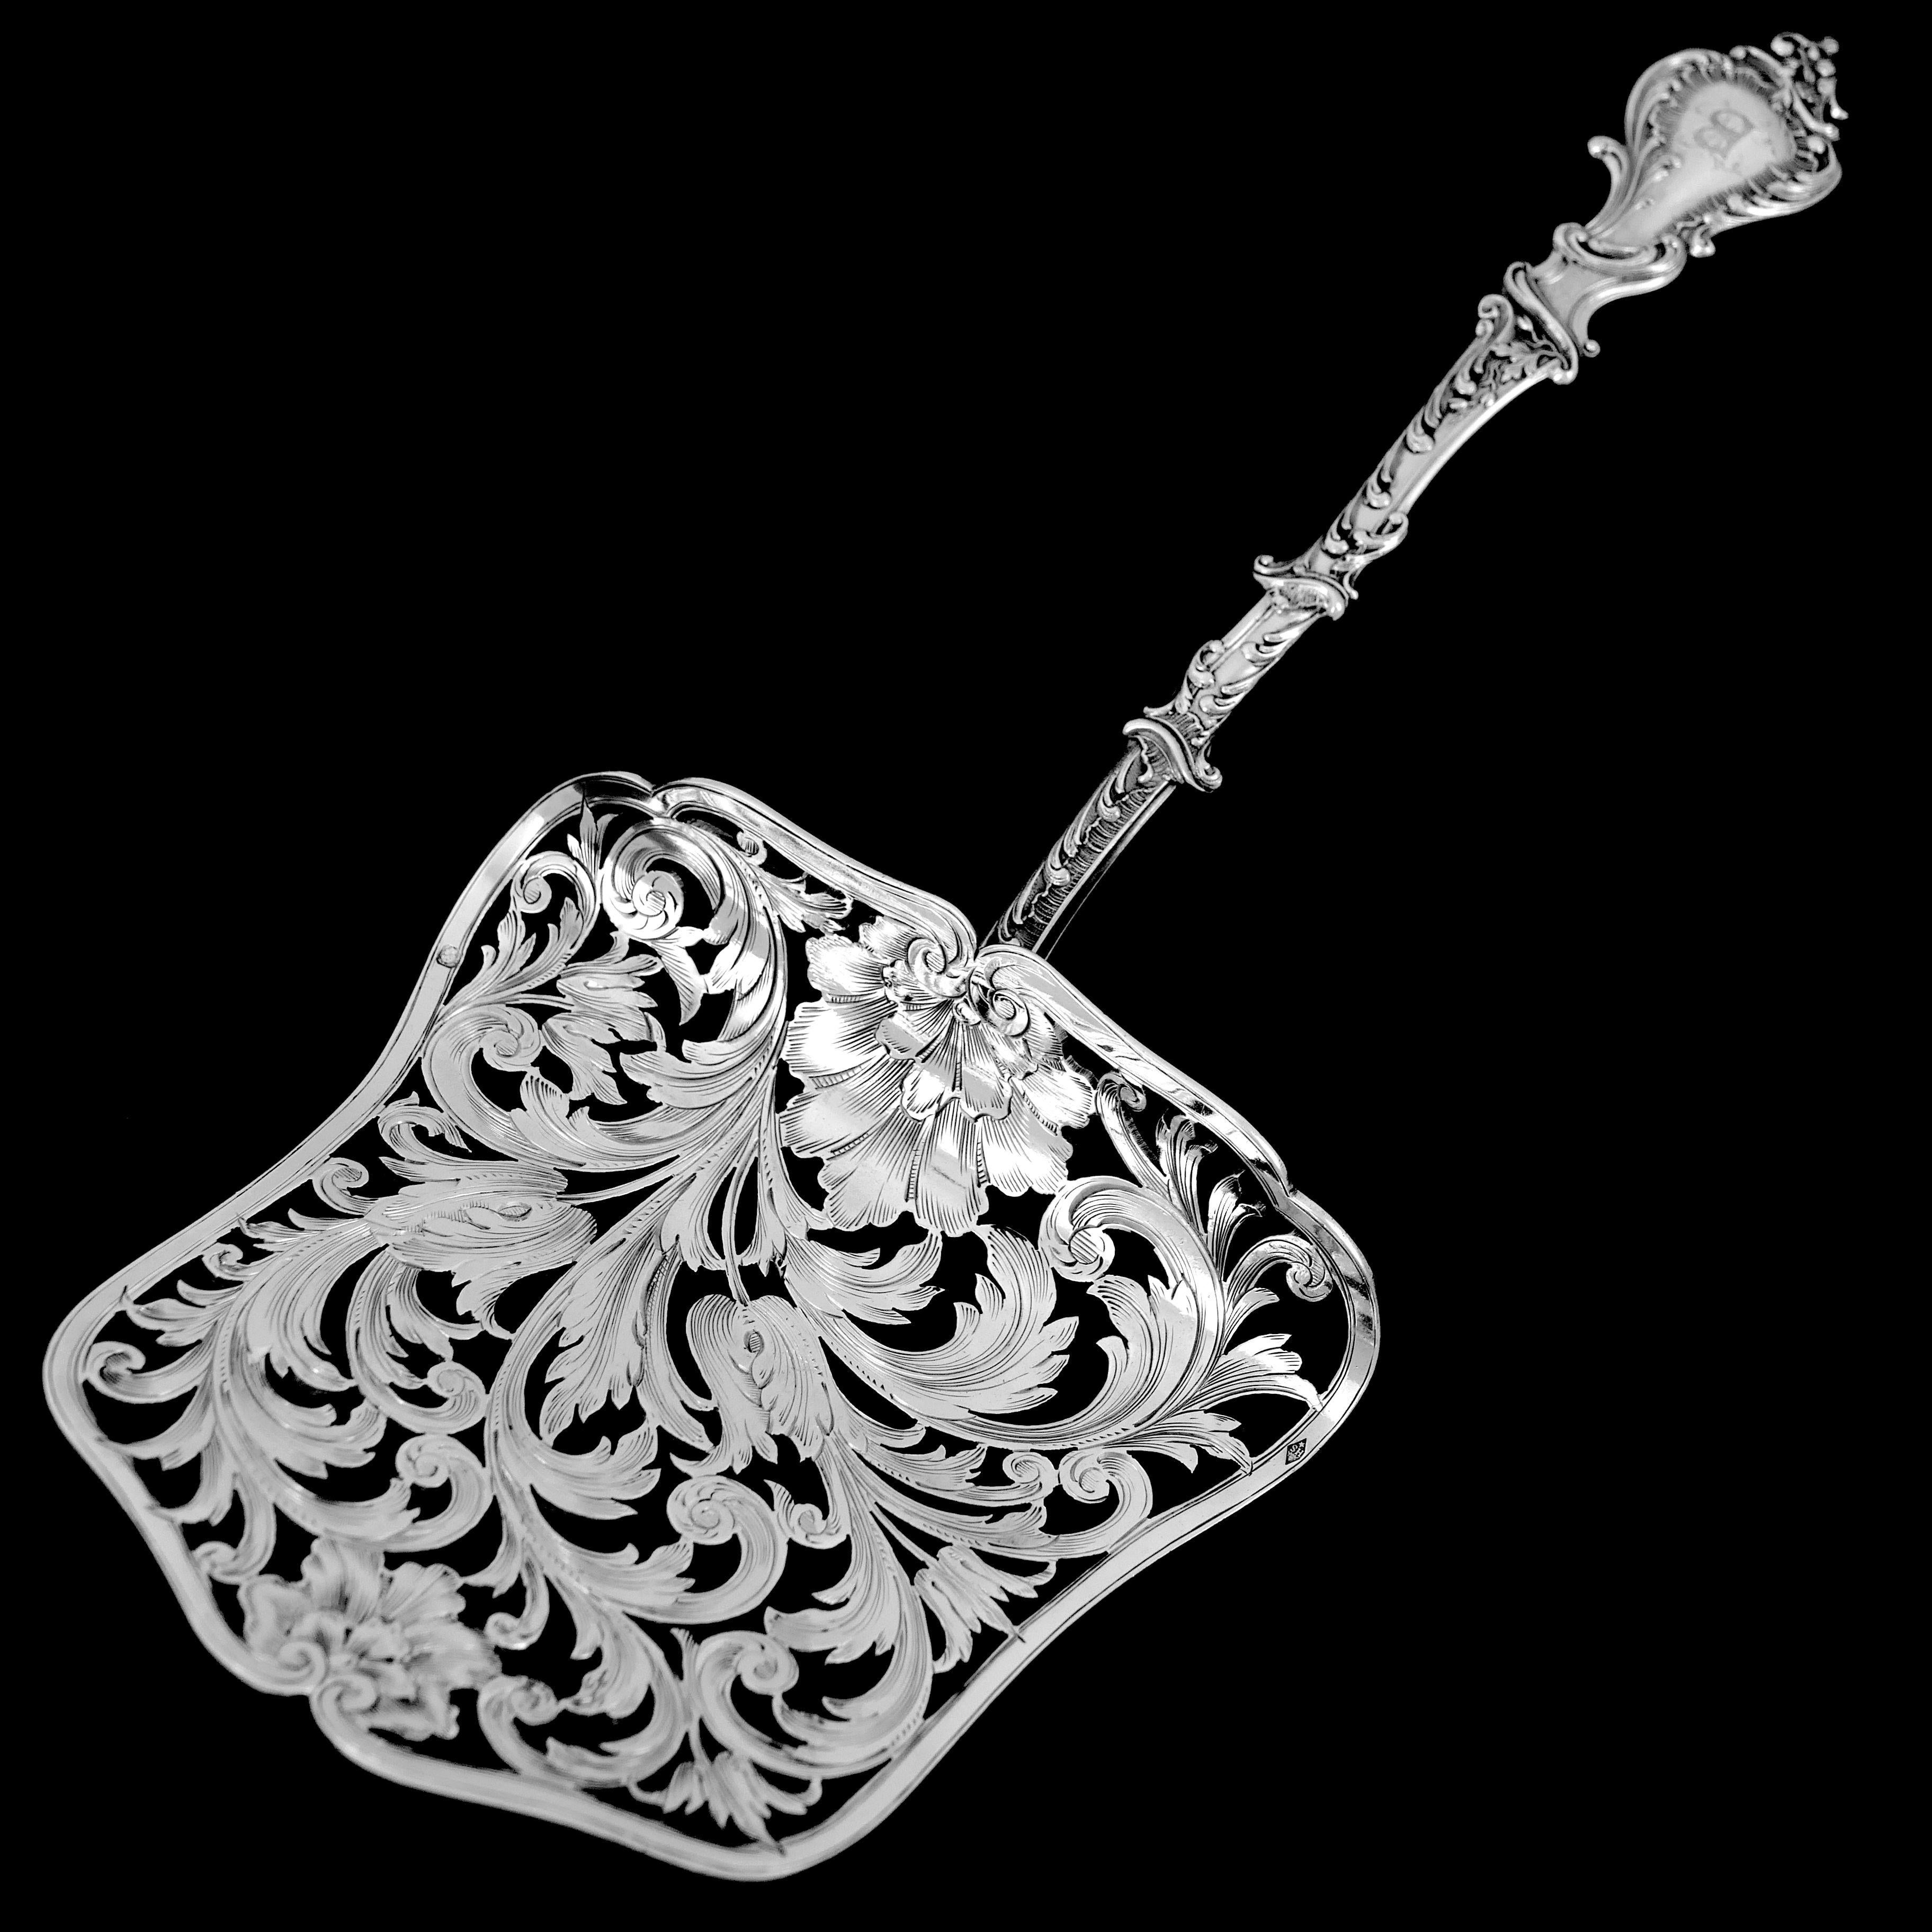 Soufflot French All Sterling Silver Asparagus Pastry Server For Sale 5